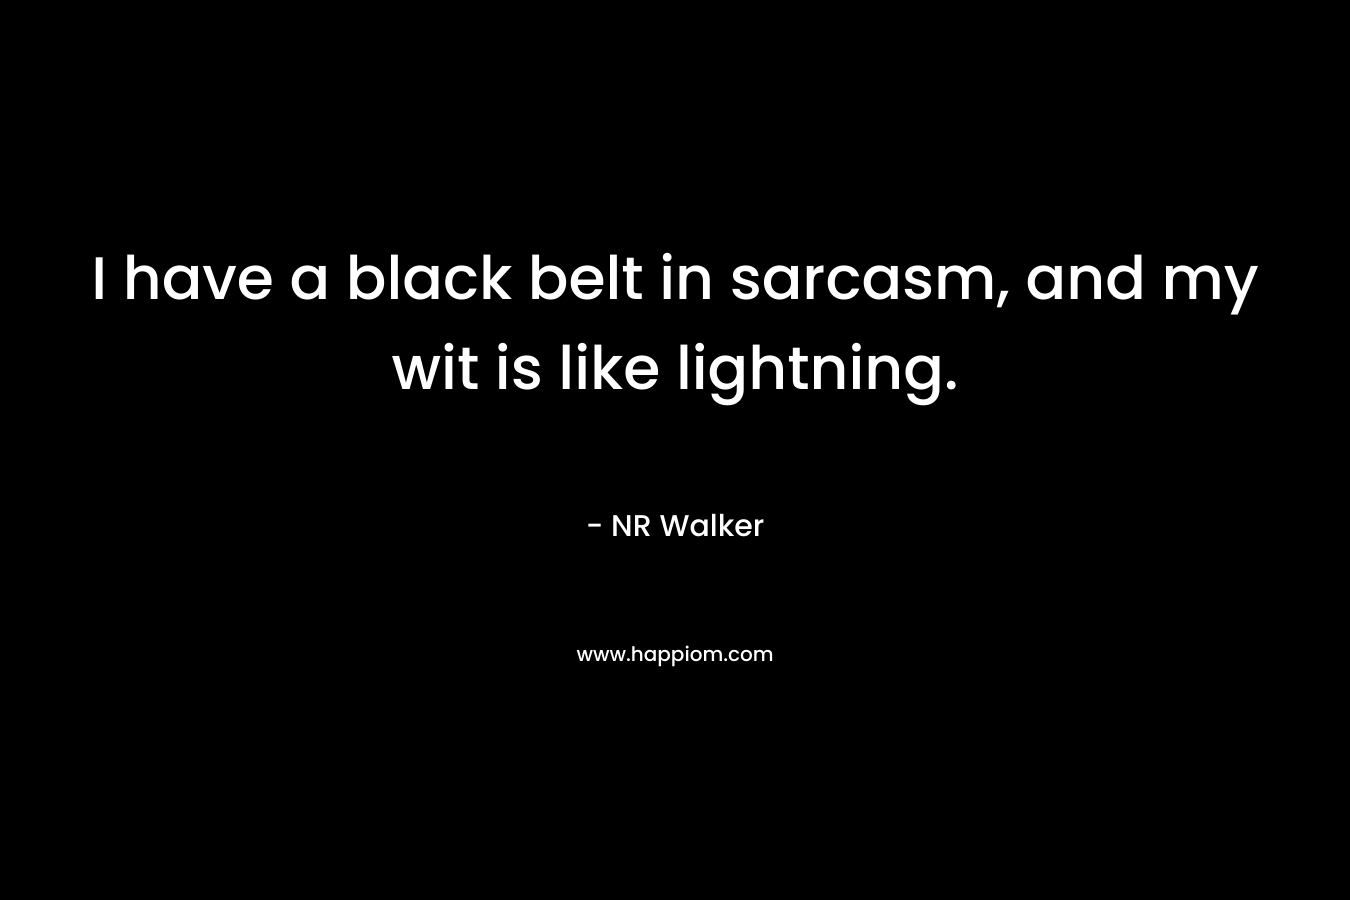 I have a black belt in sarcasm, and my wit is like lightning.